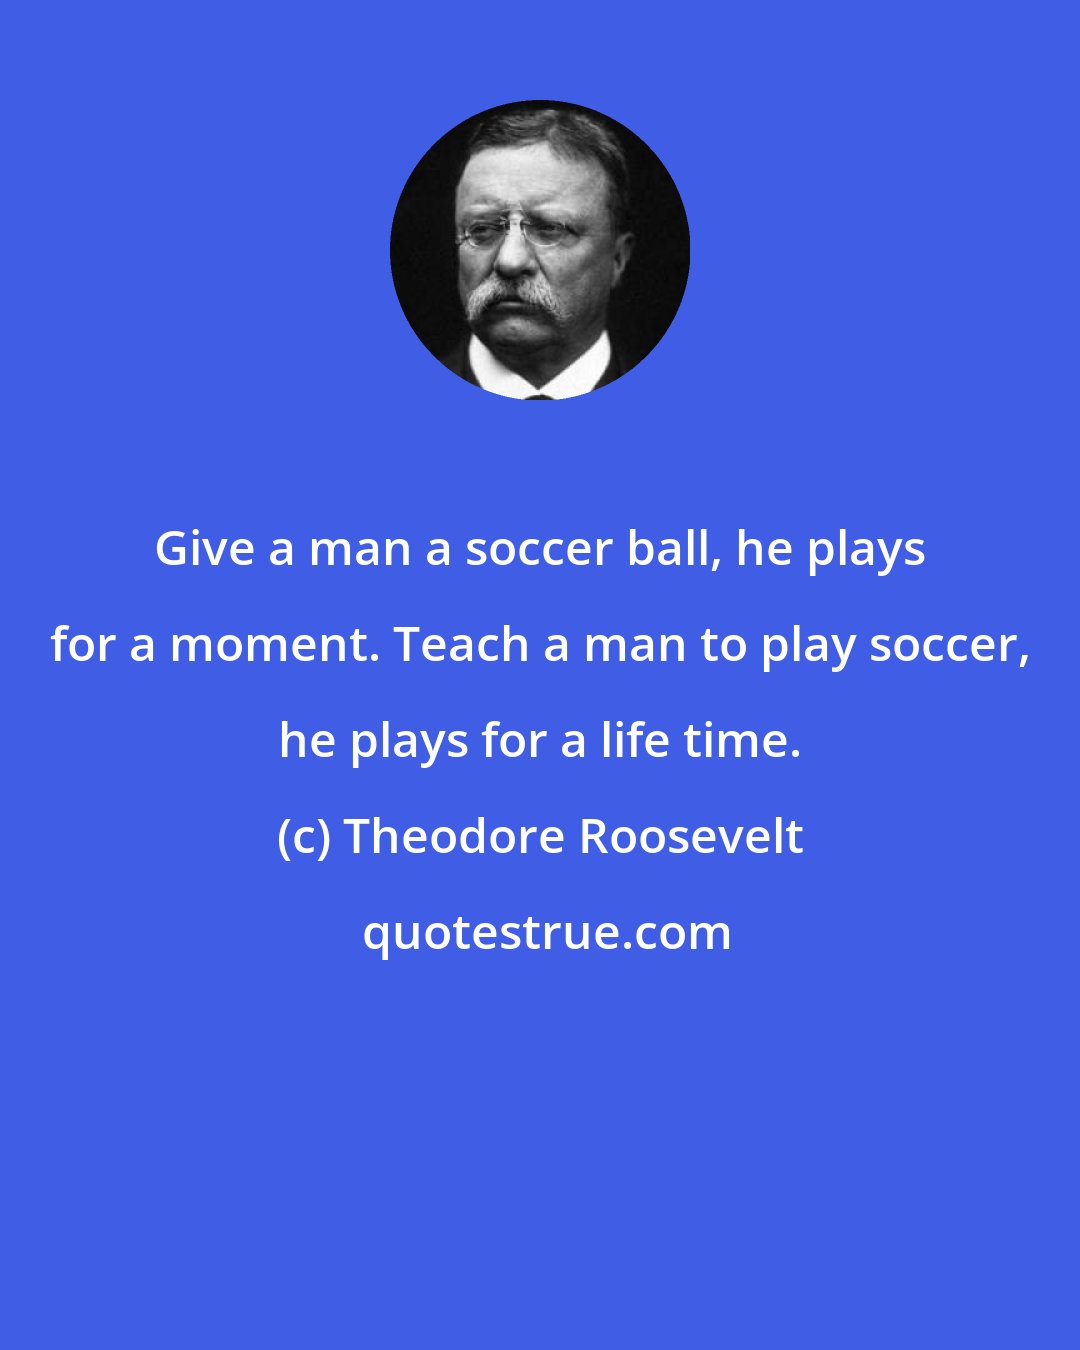 Theodore Roosevelt: Give a man a soccer ball, he plays for a moment. Teach a man to play soccer, he plays for a life time.